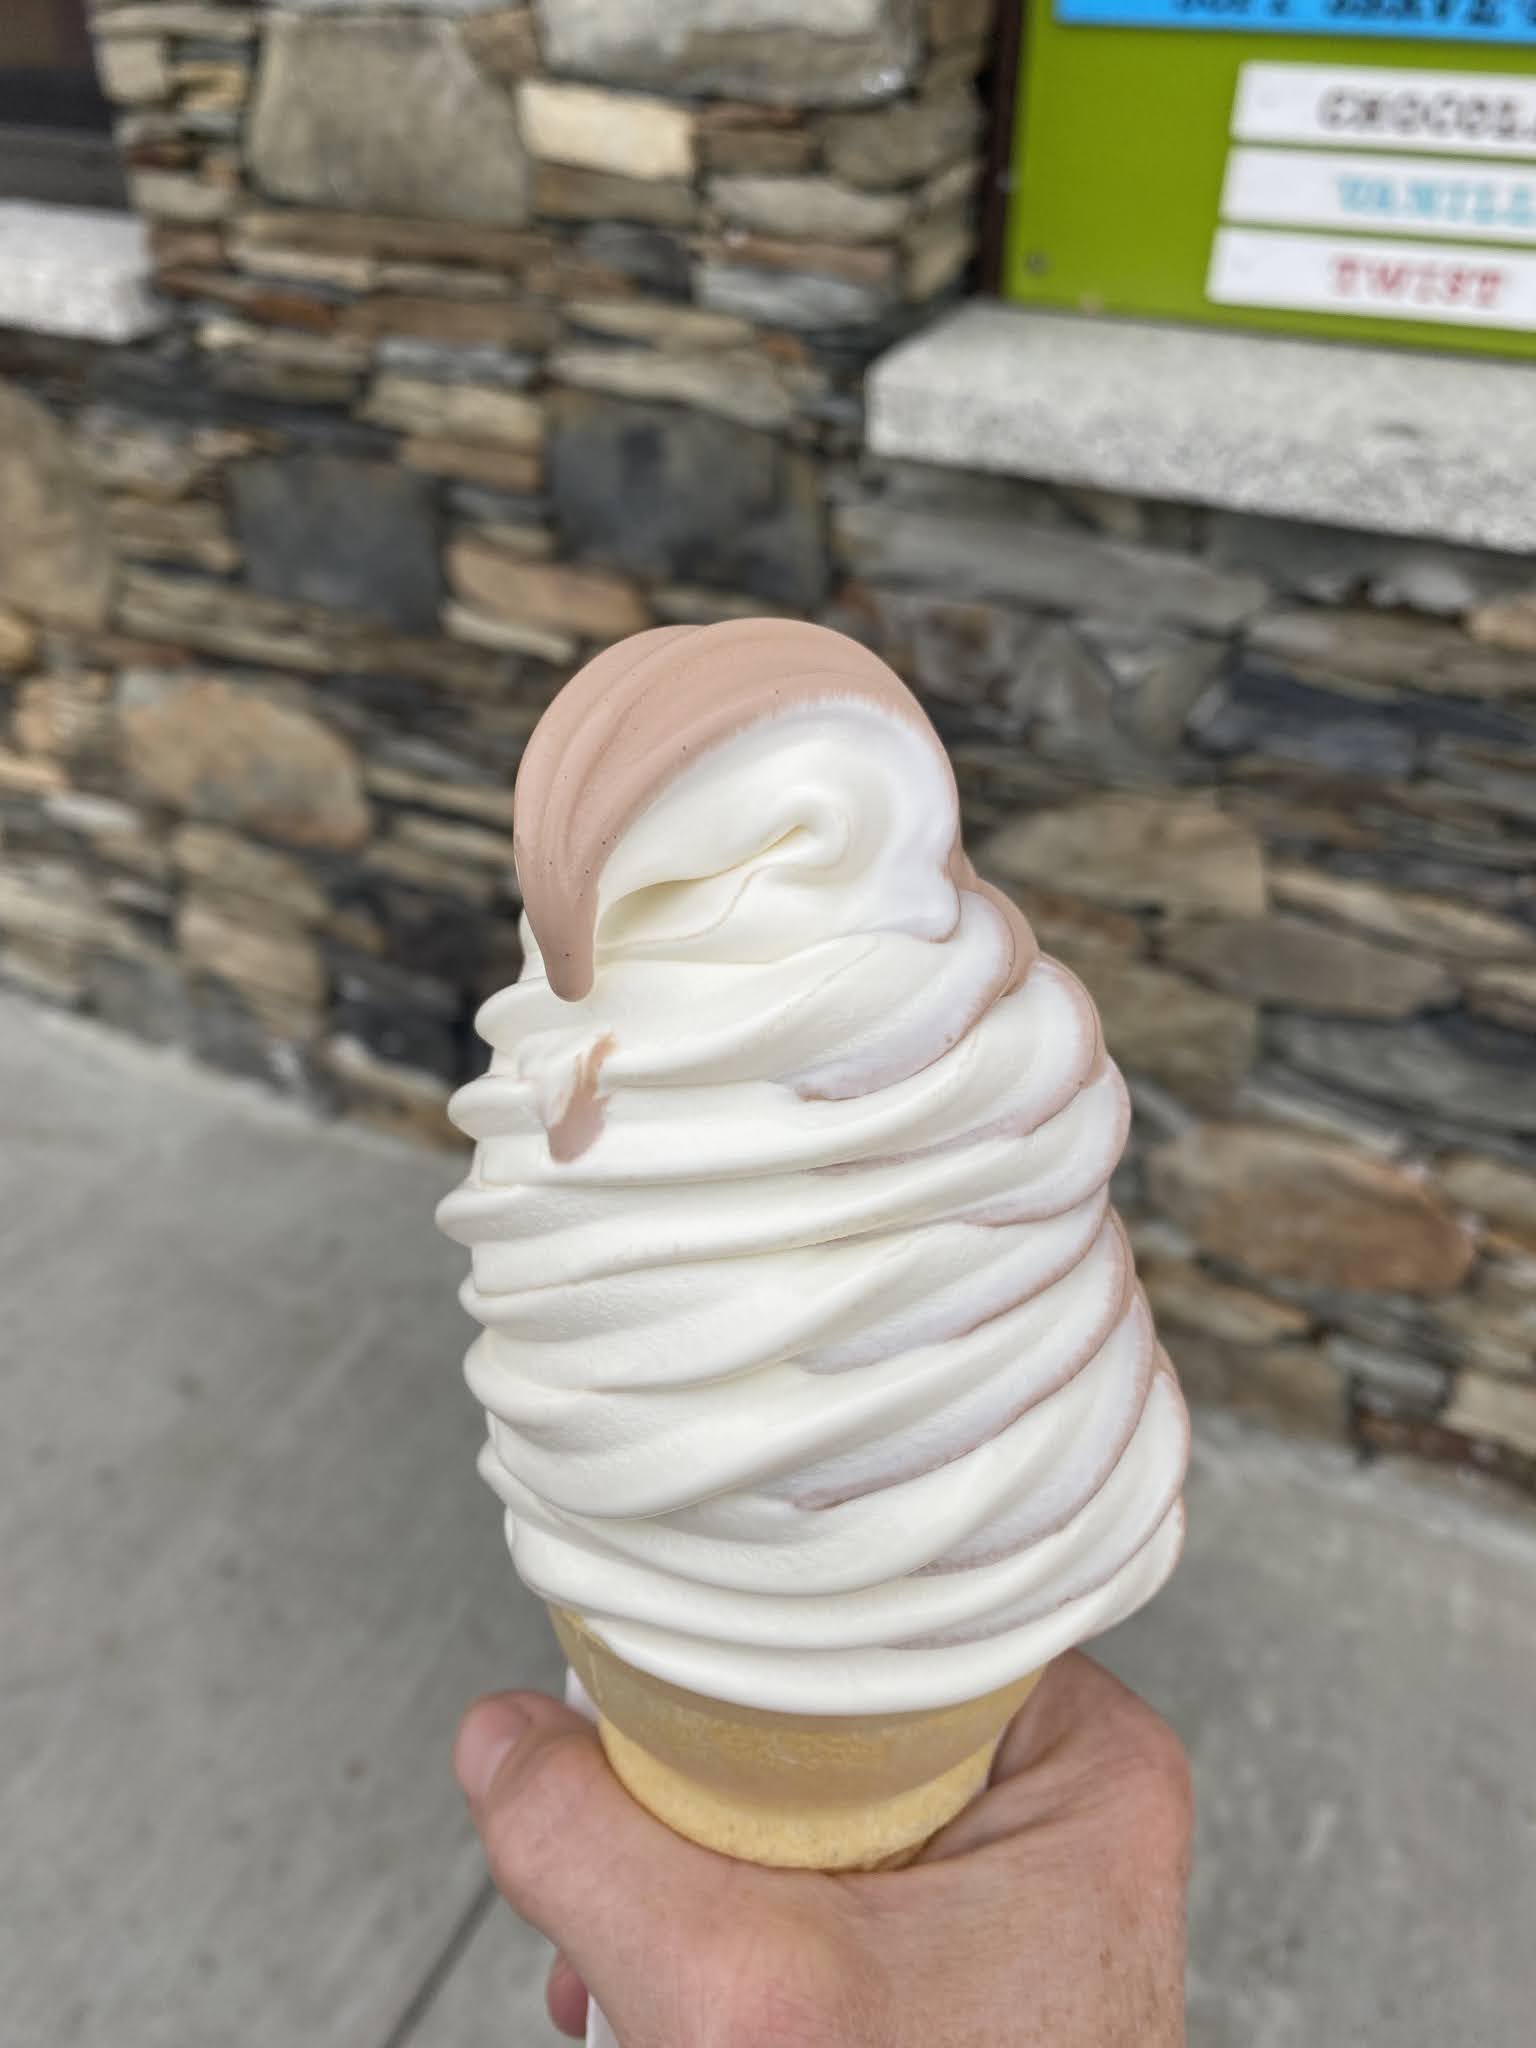 Boutilier's Blog: Exercise Ice Cream Day